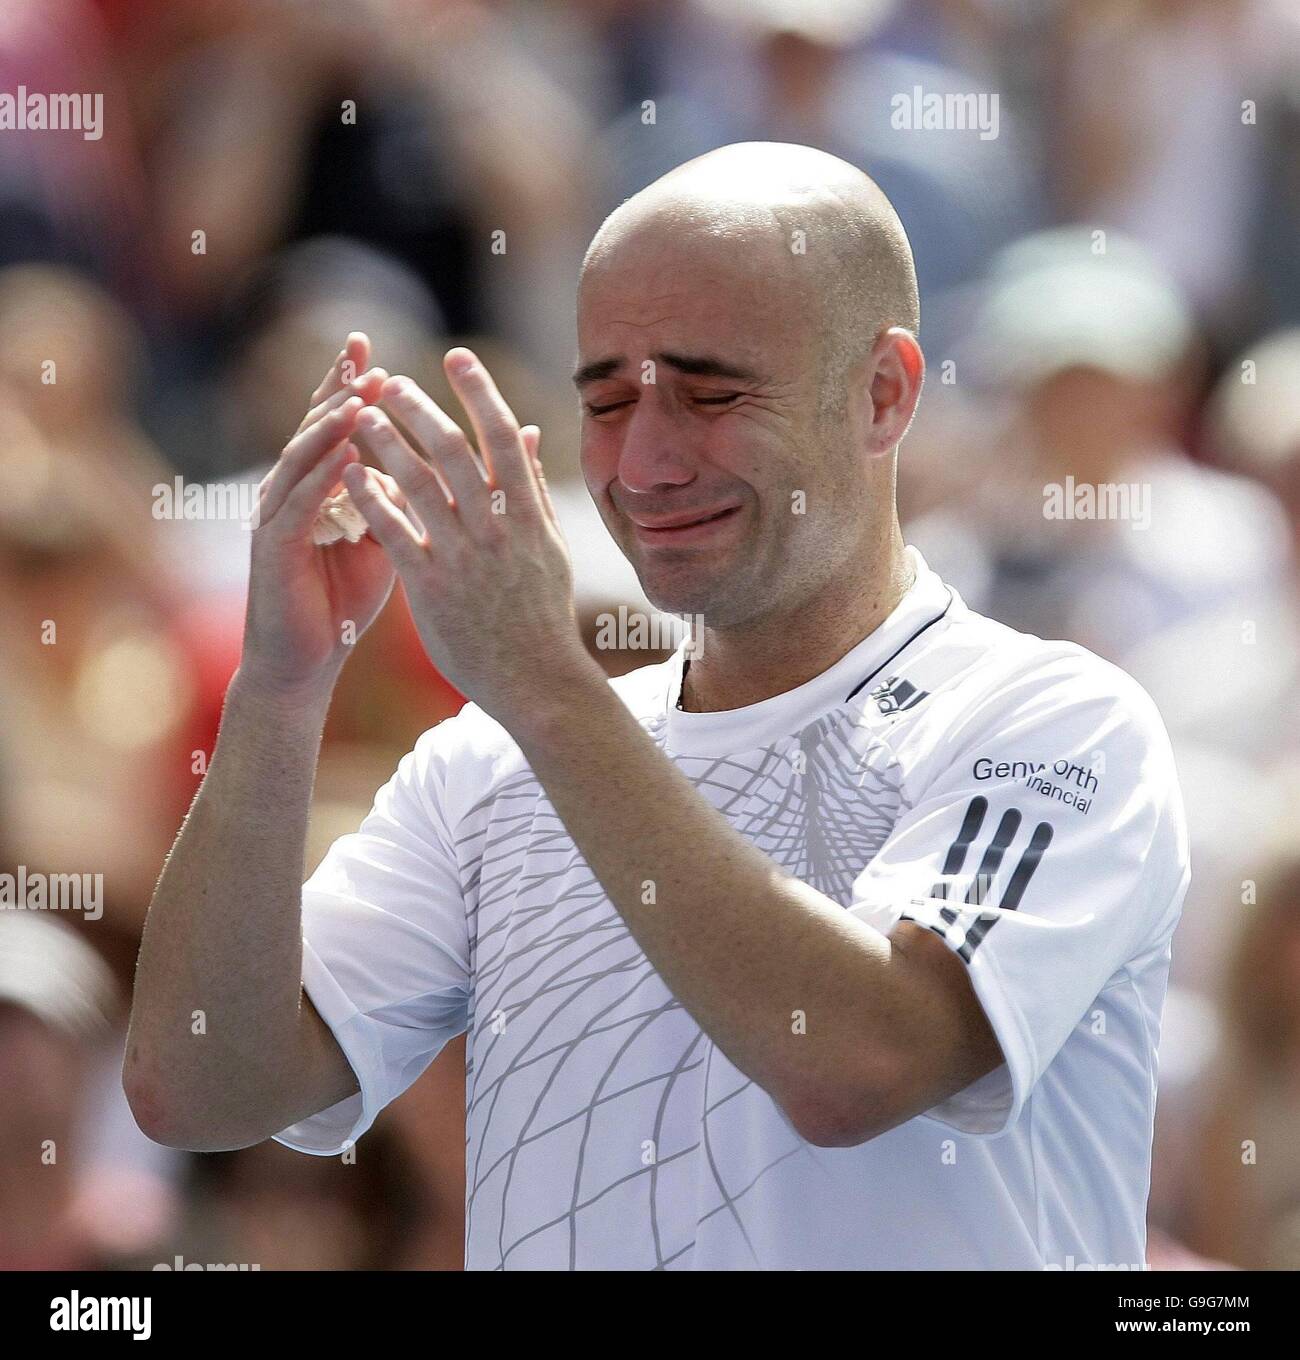 USA's Andre Agassi after losing to Germany's Benjamin Becker in the third round of the US Open at Flushing Meadow, New York. Stock Photo